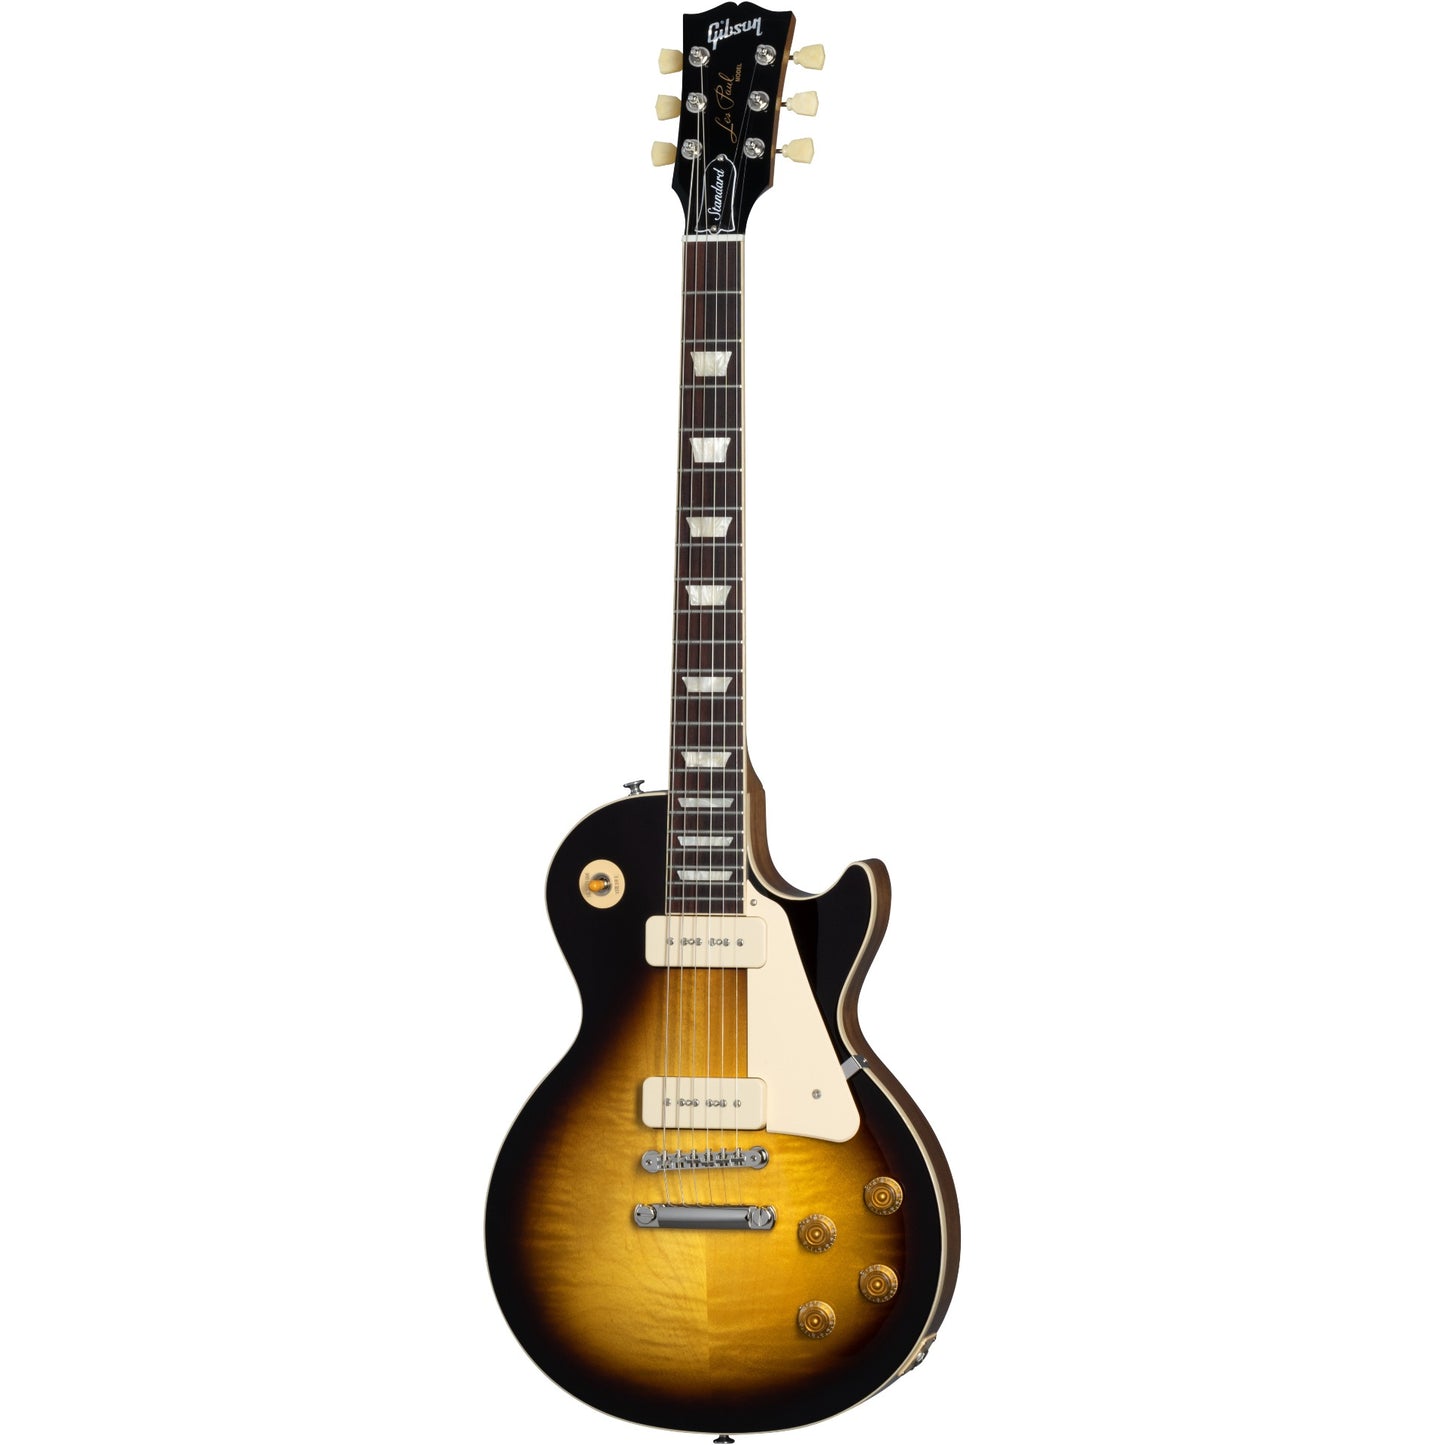 Gibson Les Paul Standard ‘50s P-90 Electric Guitar in Tobacco Burst